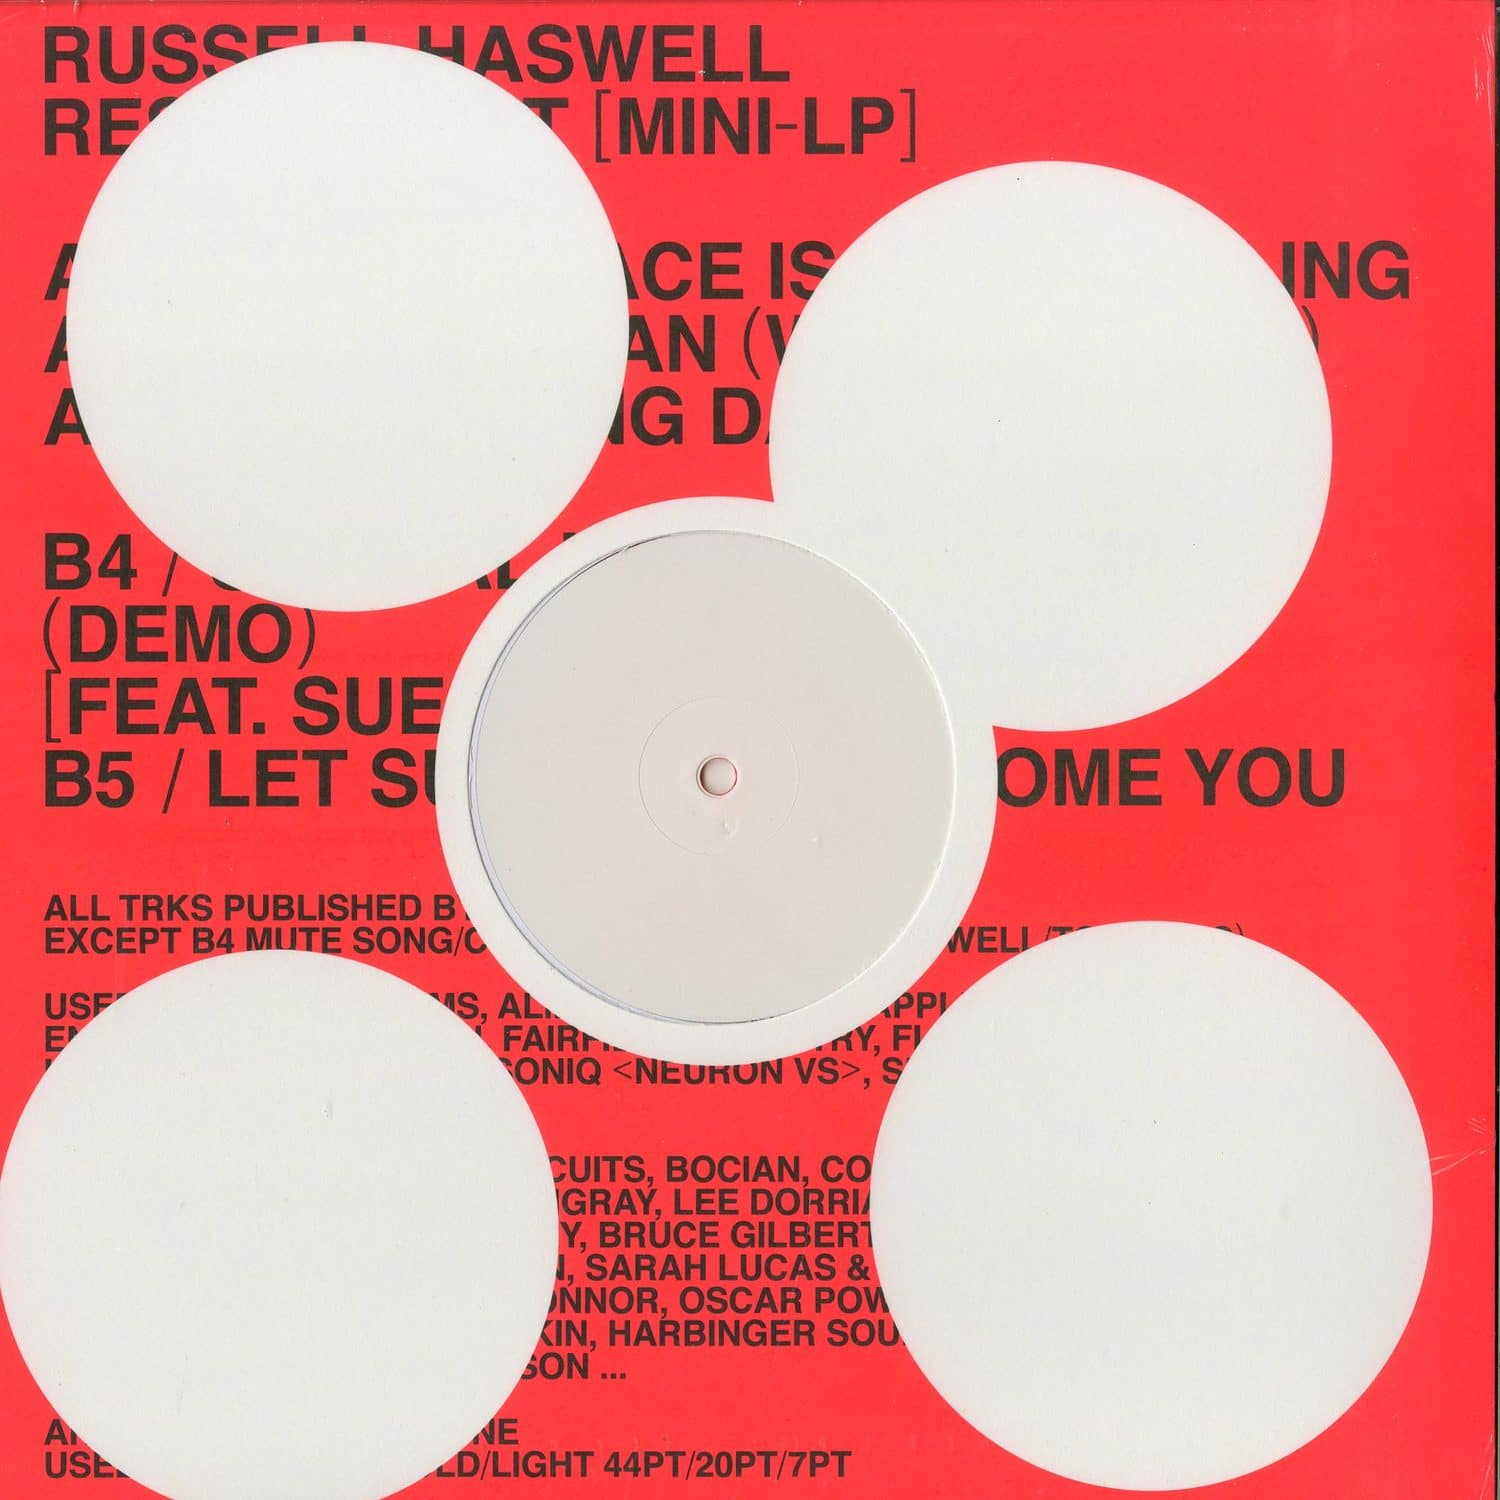 Russell Haswell - RESPONDENT 